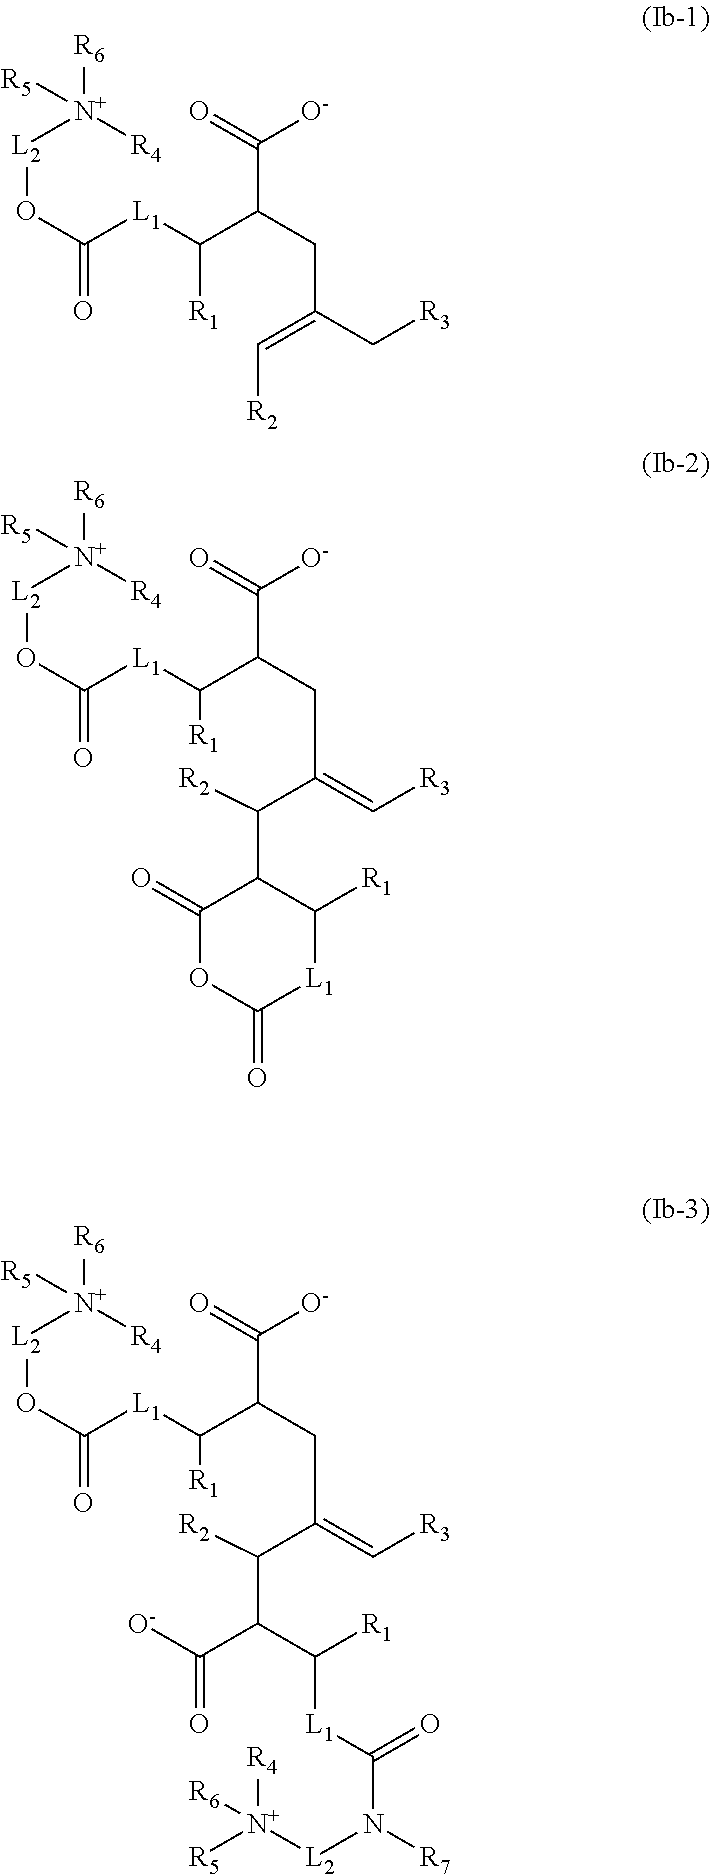 Acid-free quaternized nitrogen compounds and use thereof as additives in fuels and lubricants